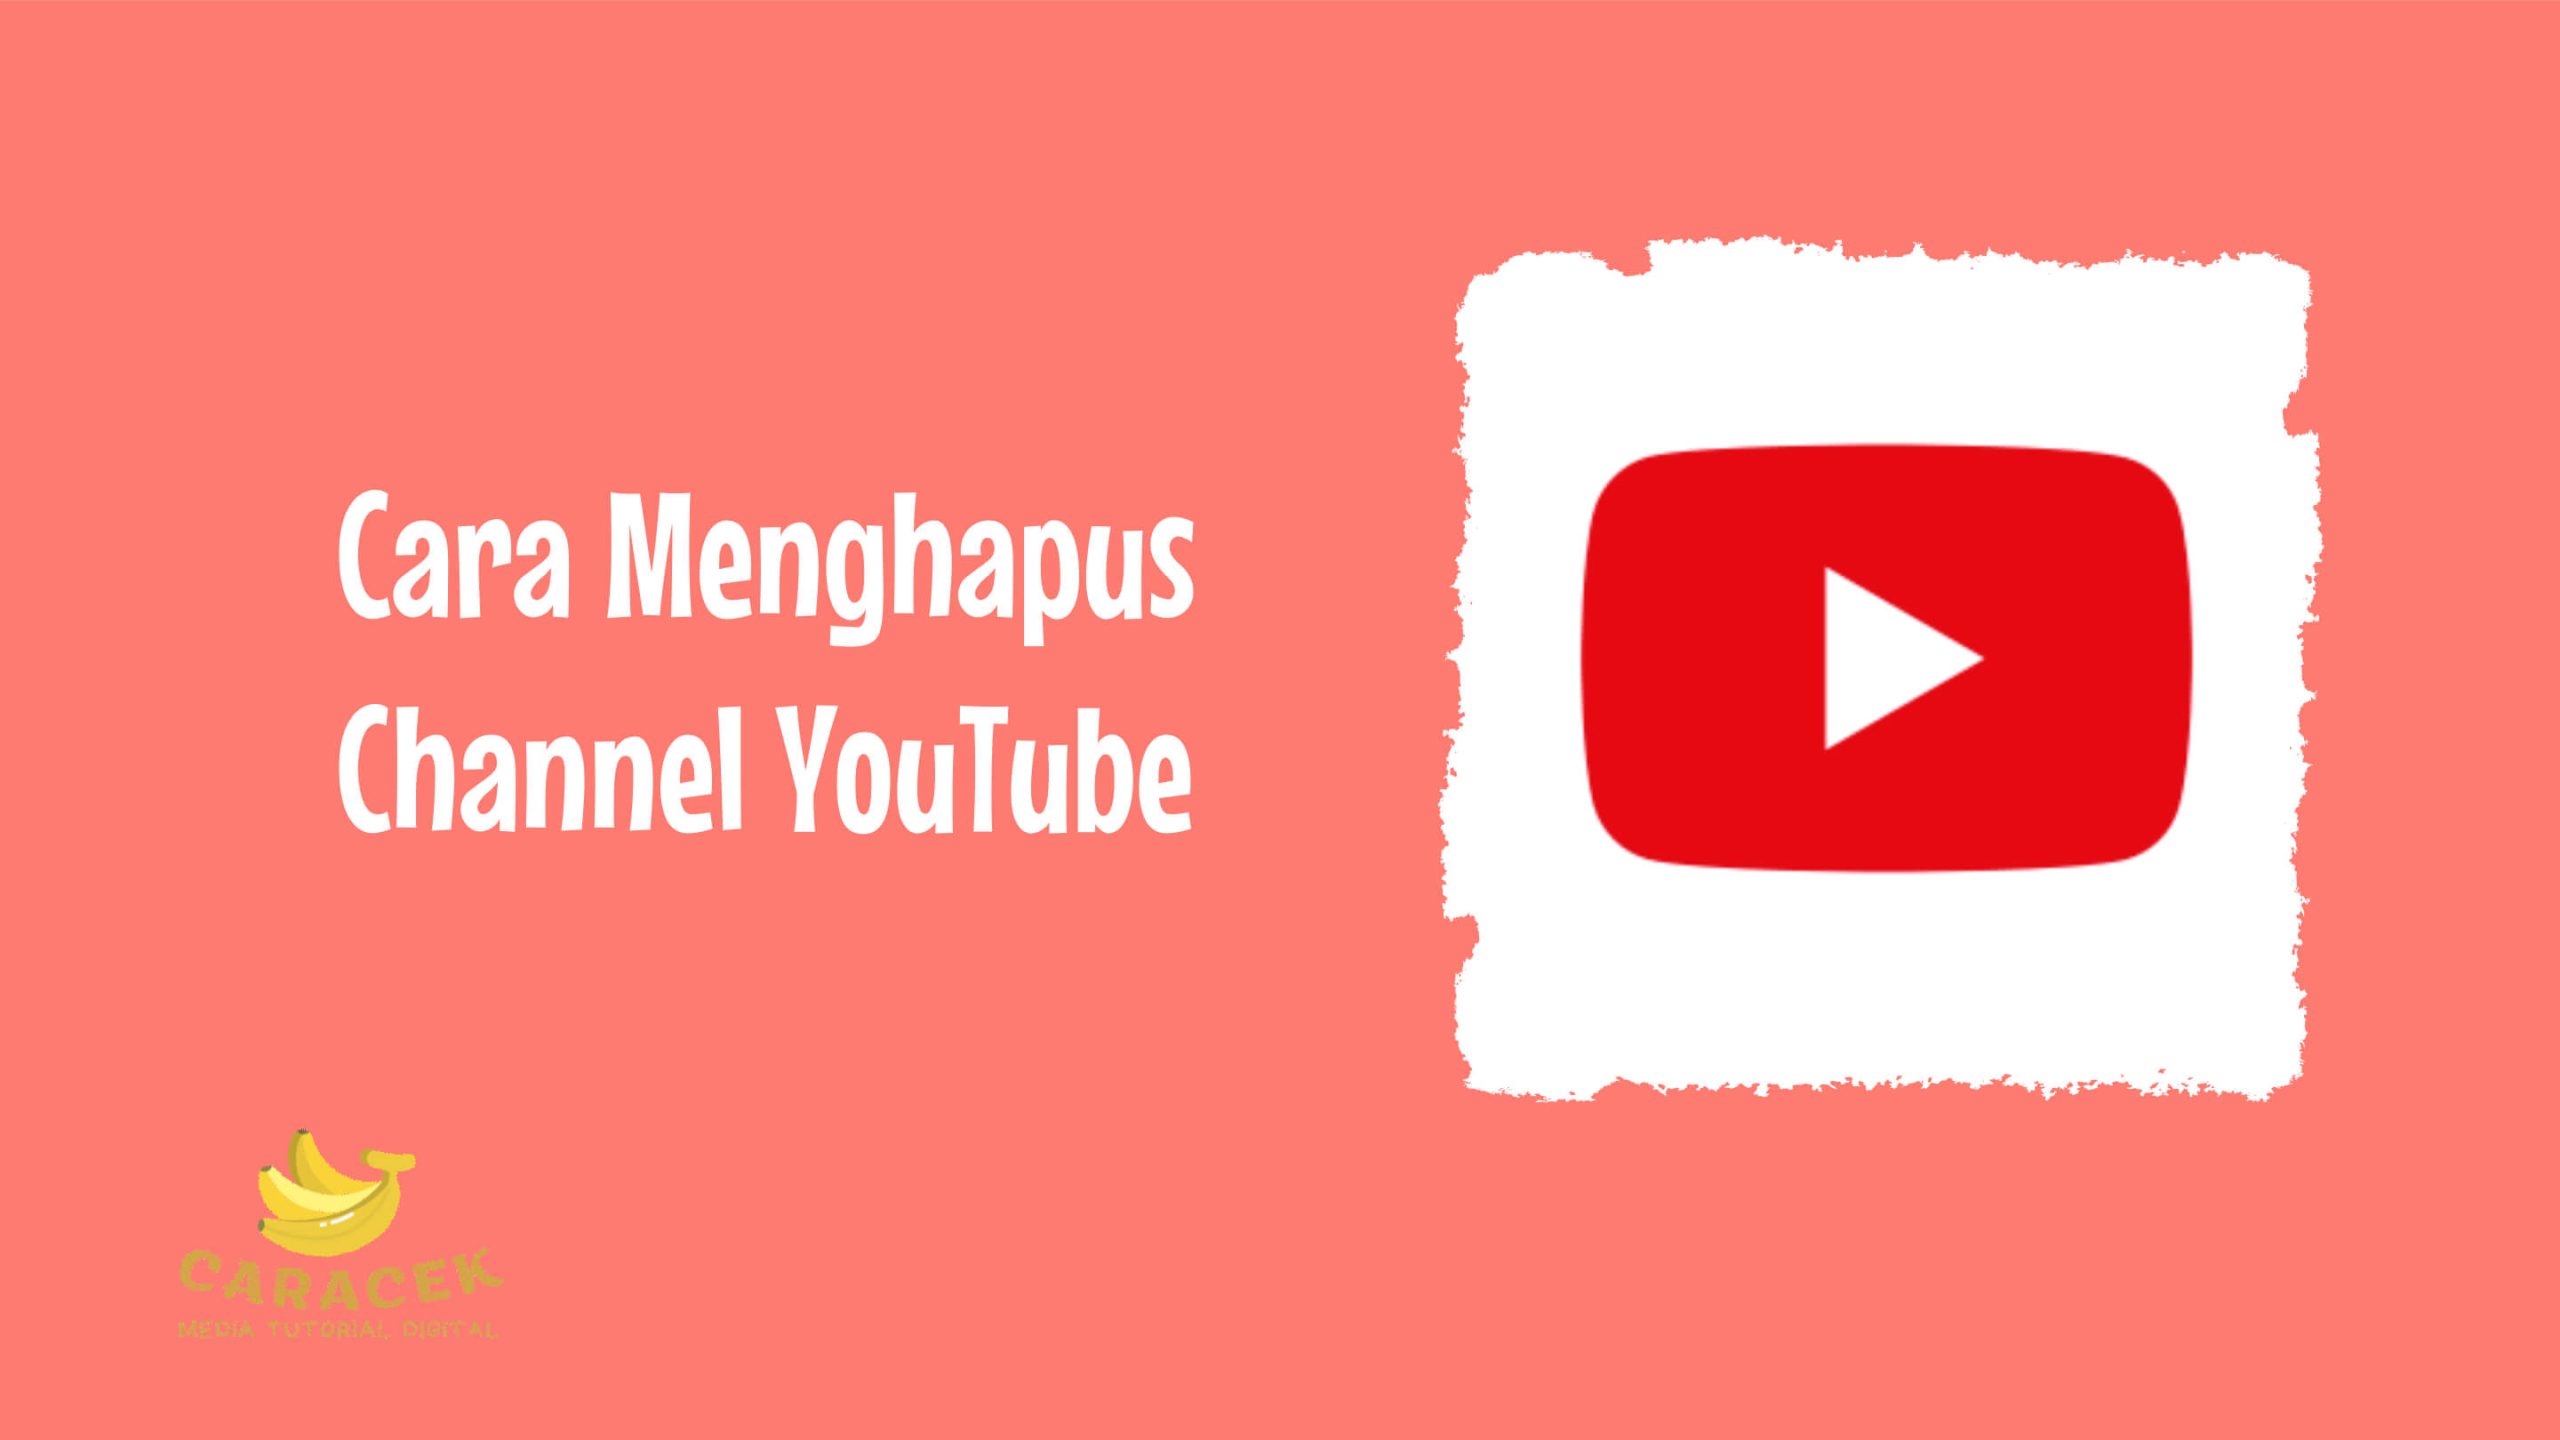 Menghapus Channel YouTube